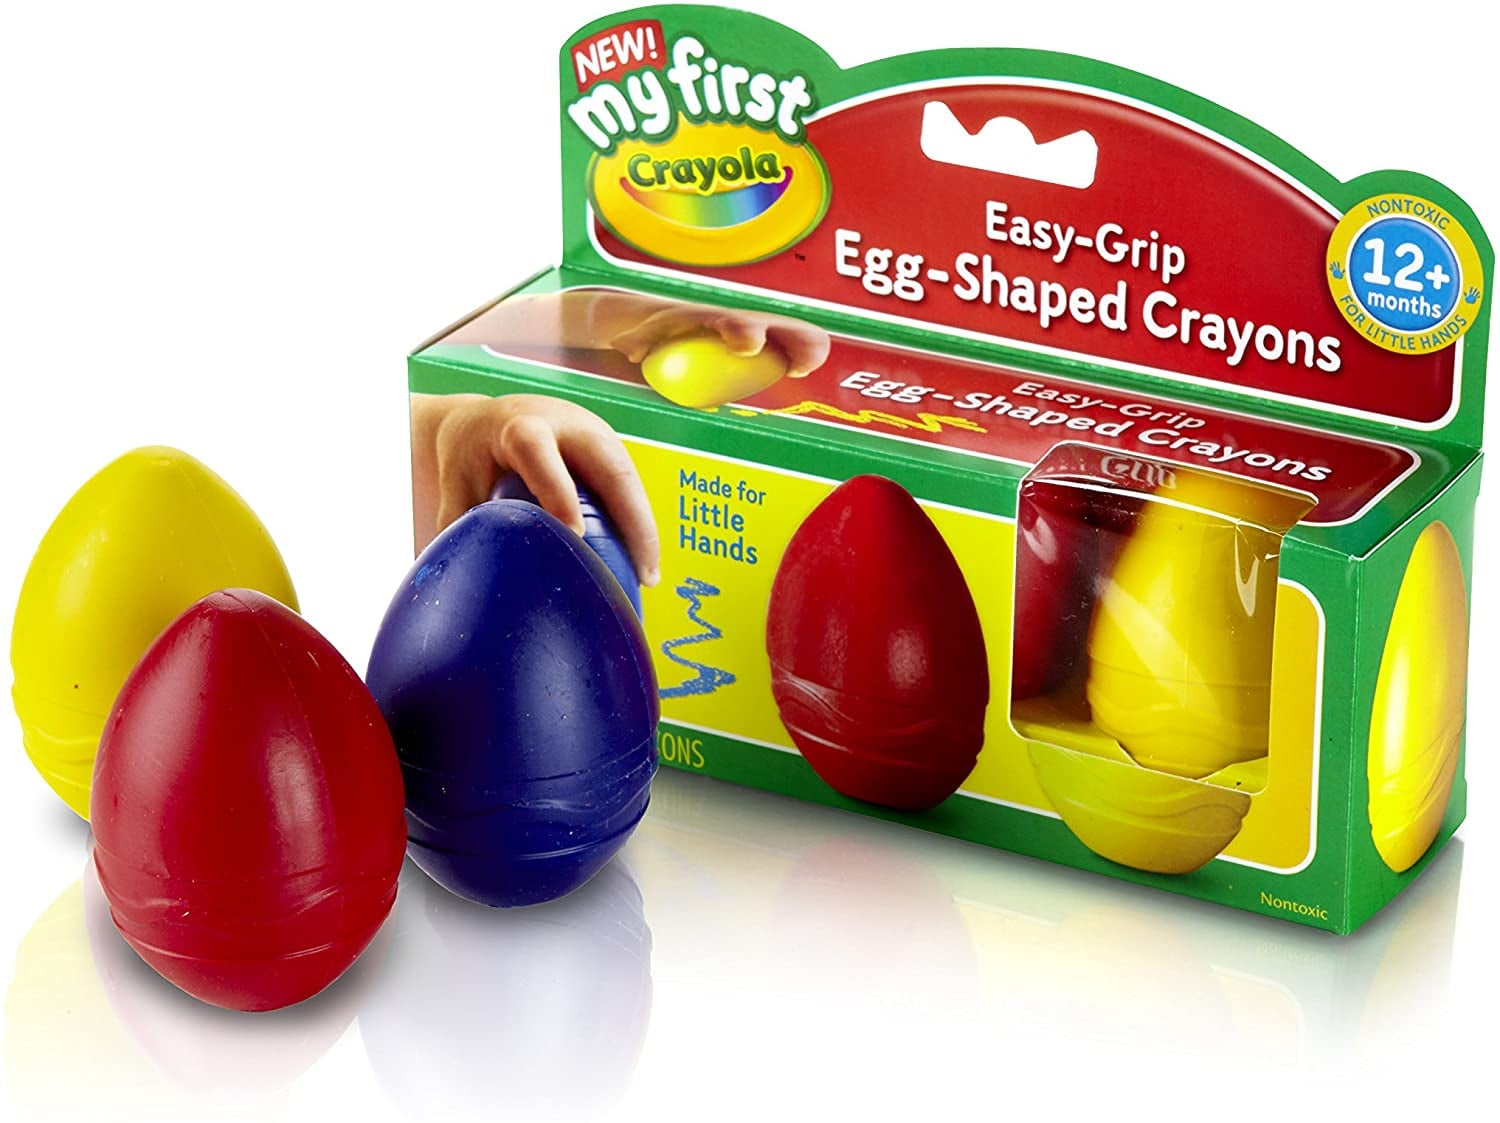 Crayola Washable Palm Grasp Crayons For Toddlers, 21 Things to Fill Your  Toddler's Easter Basket With, From Educational Toys to Sweet Treats